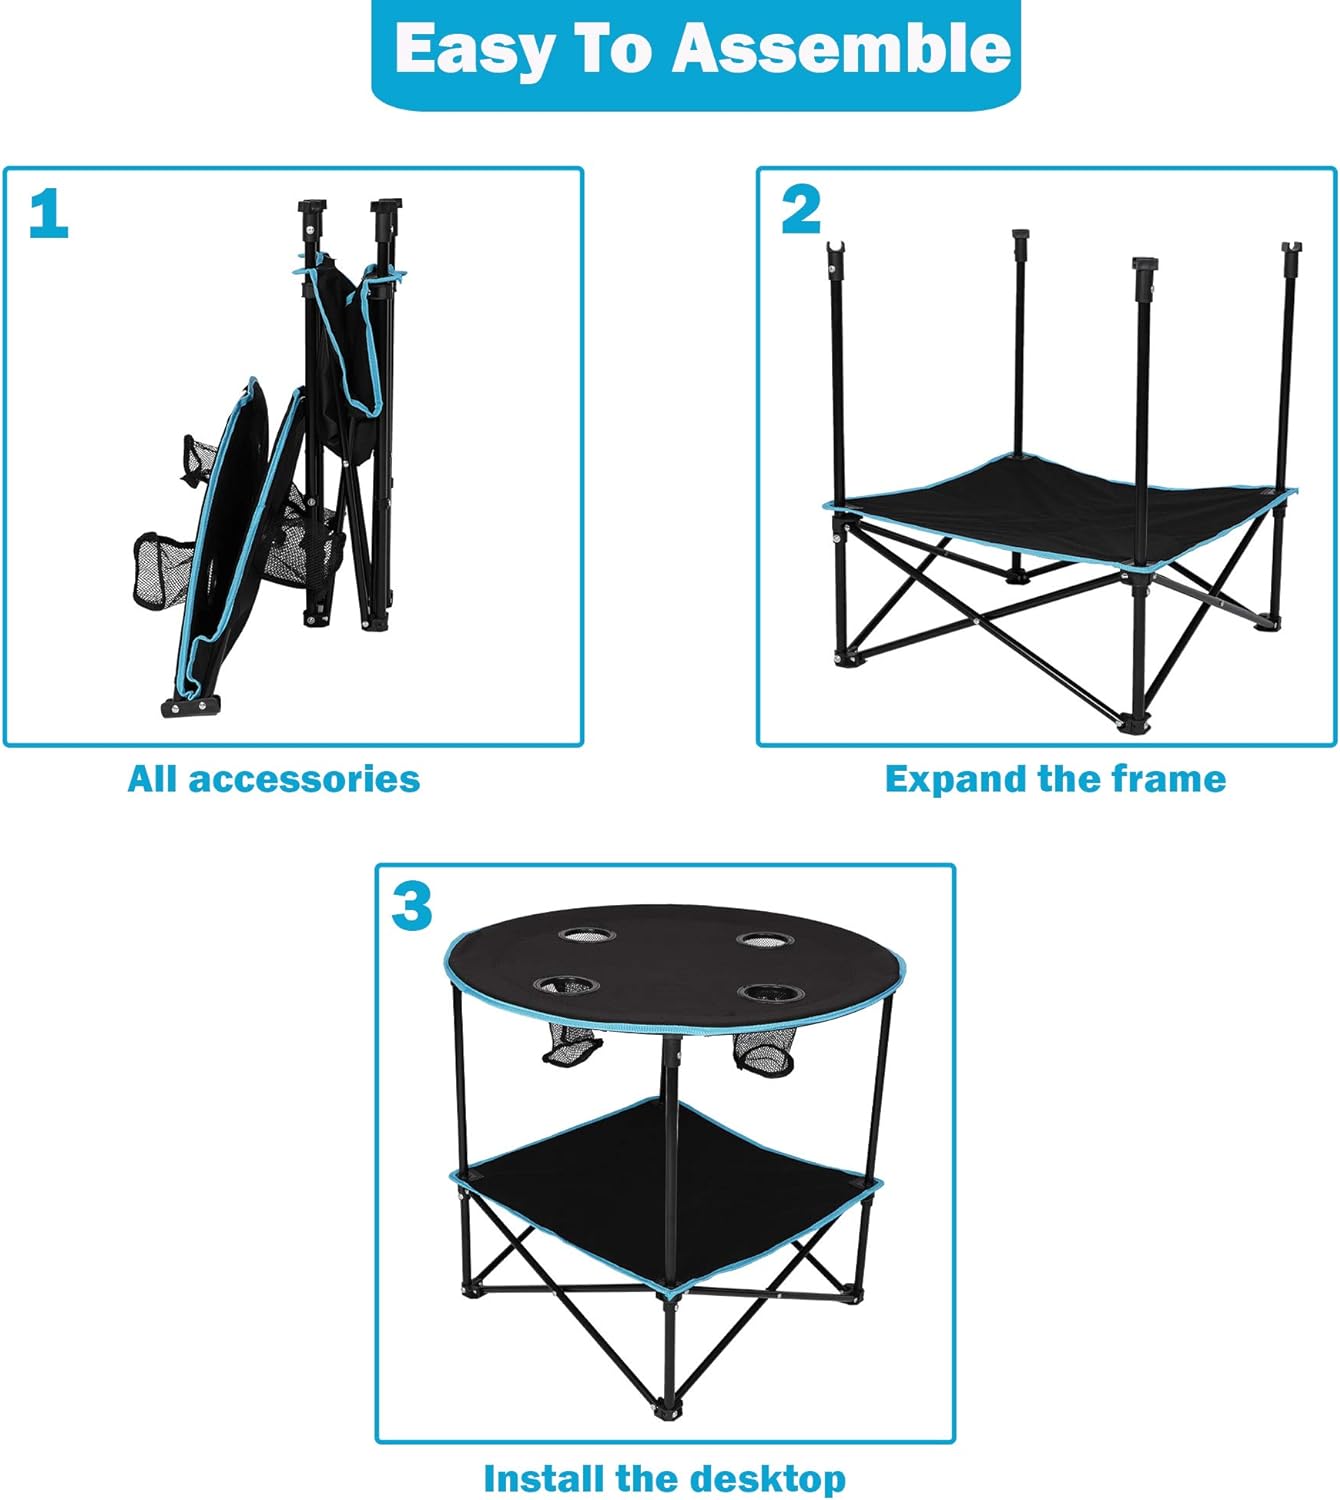 Round Outdoor Table Portable Small Folding Camping Table with Cup Holder and Carry Bag